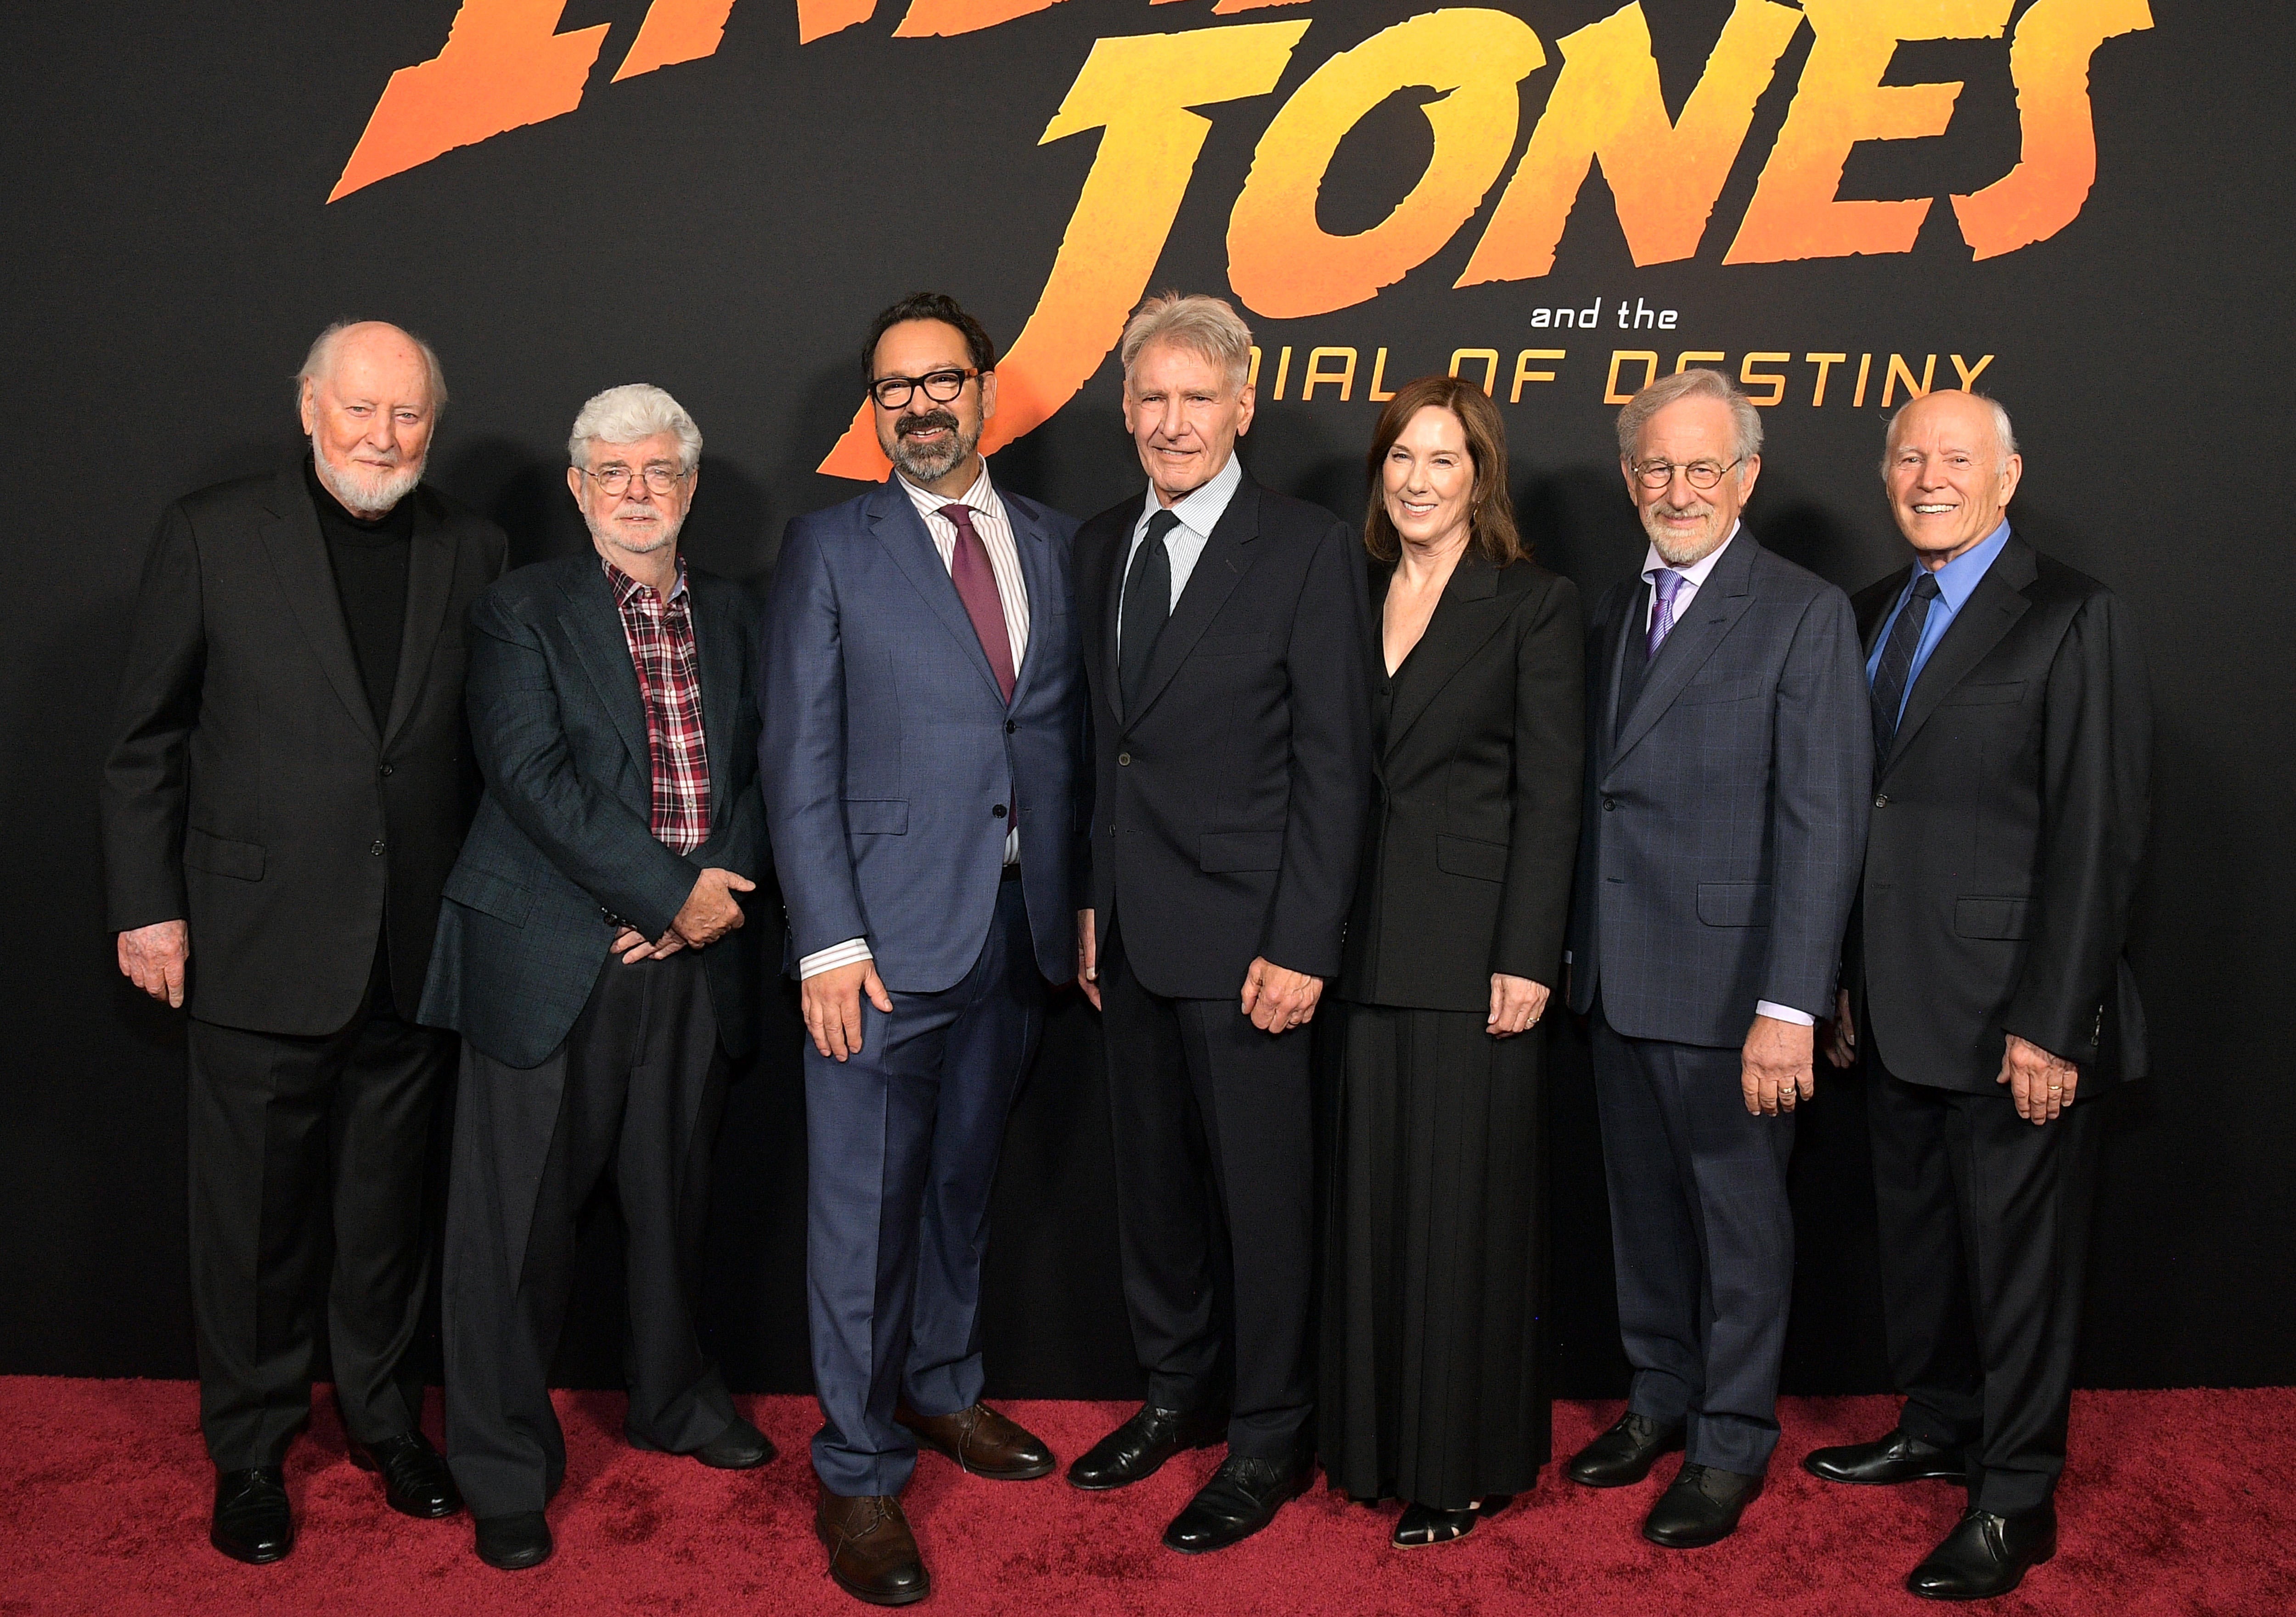 U.S. Premiere of Indiana Jones and the Dial of Destiny